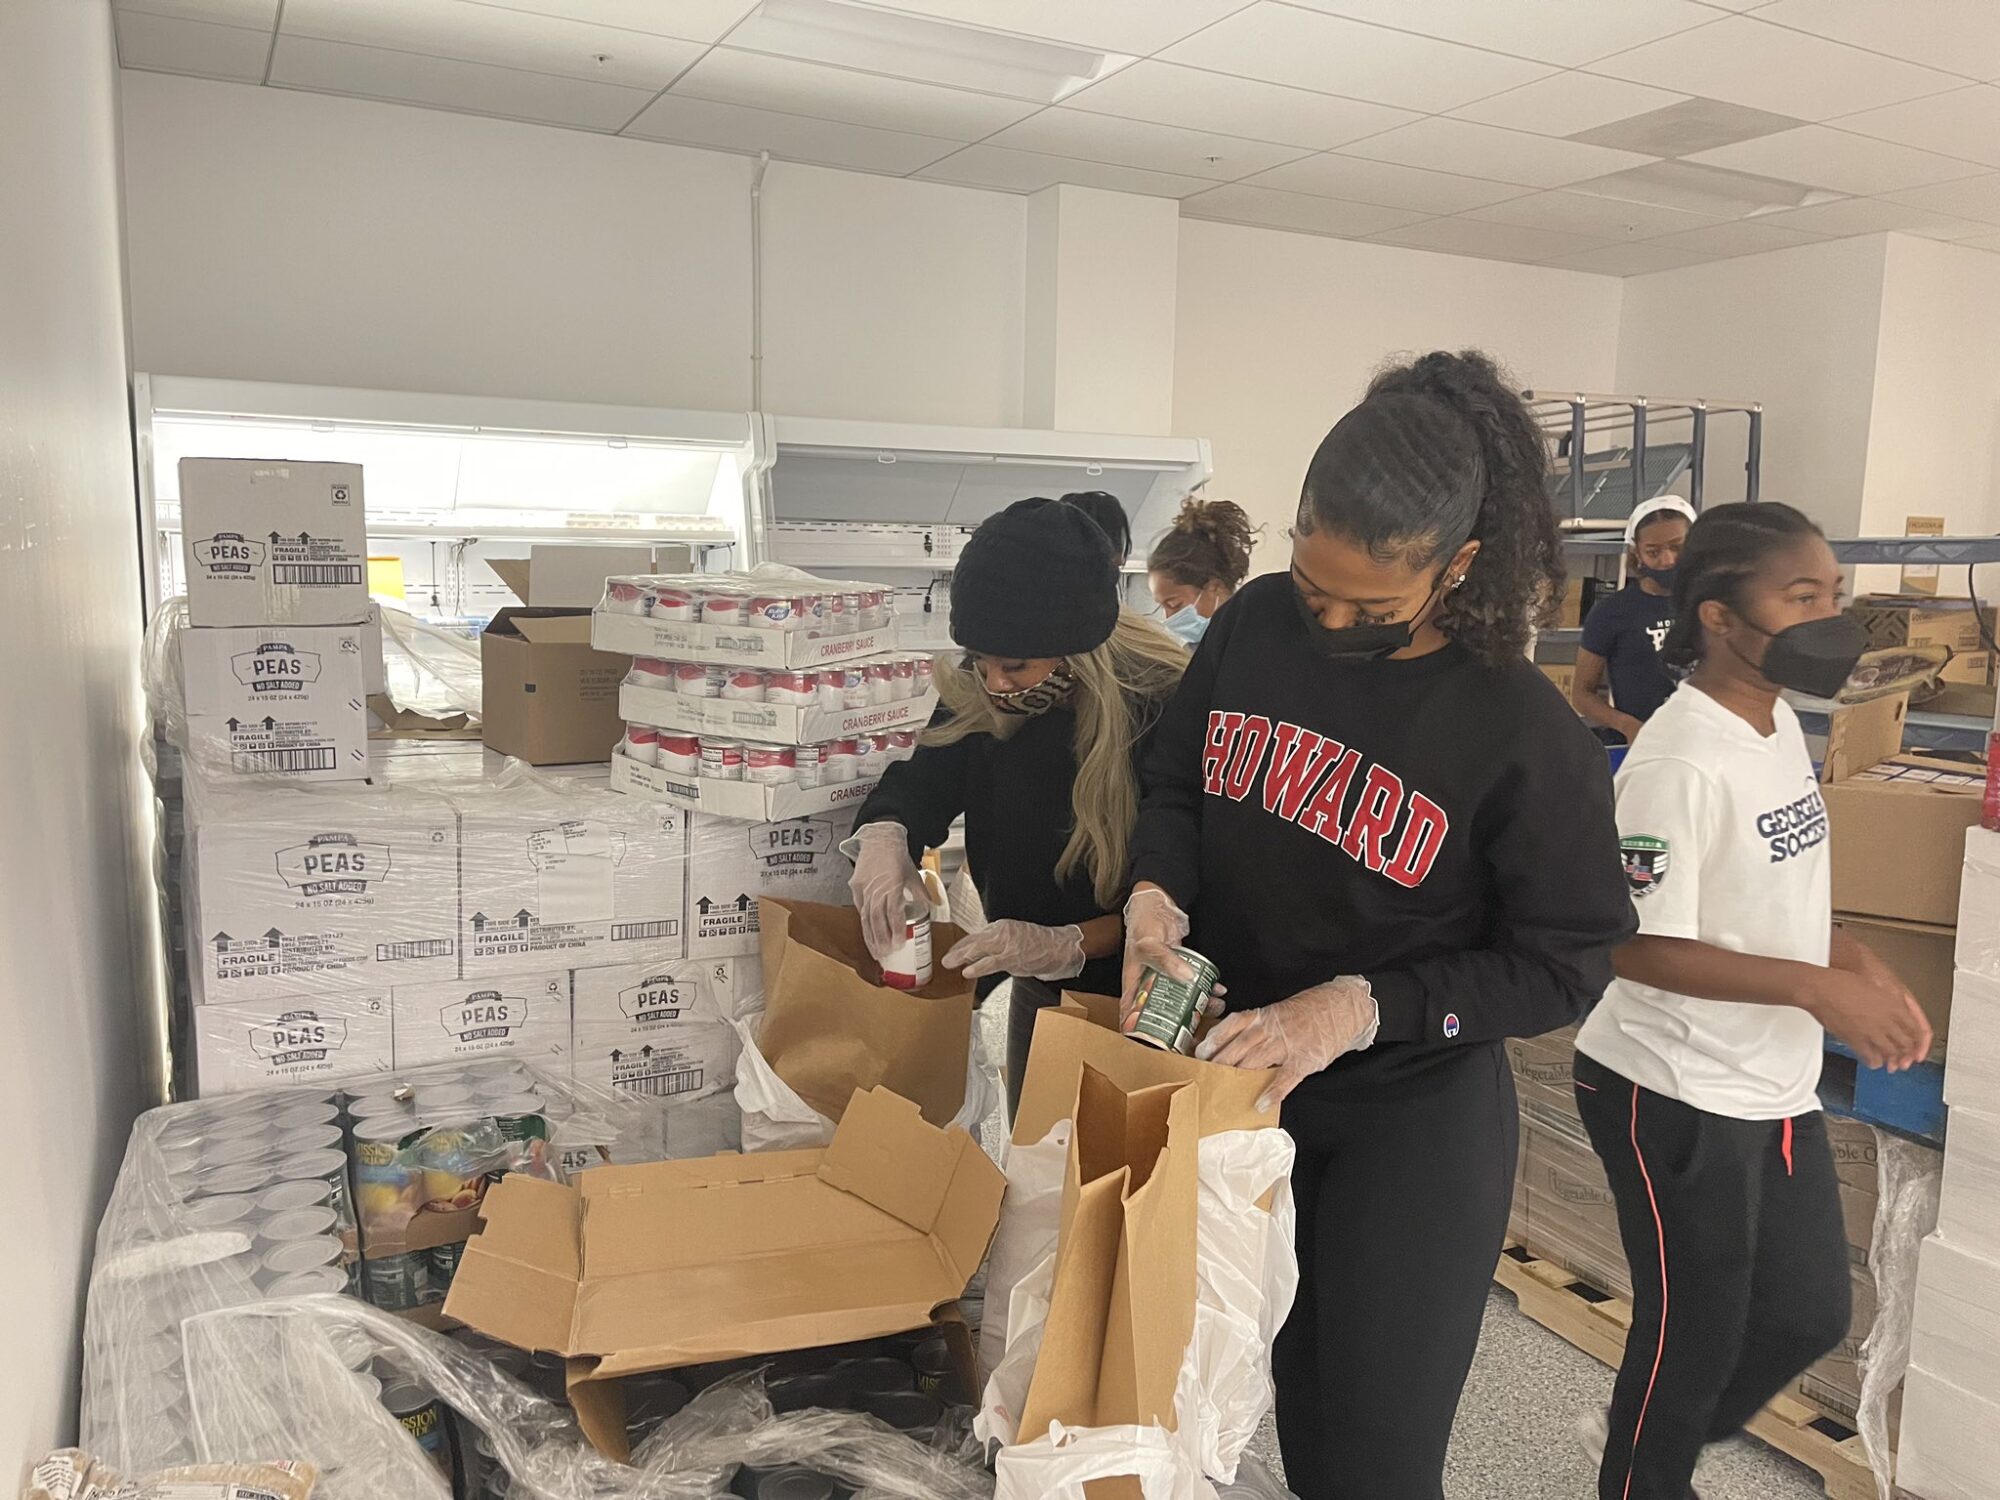 A Howard University student-athlete packs a grocery bag at the Bread for the City facility. Other student athletes stand behind her and there are boxes stacked on the ground.